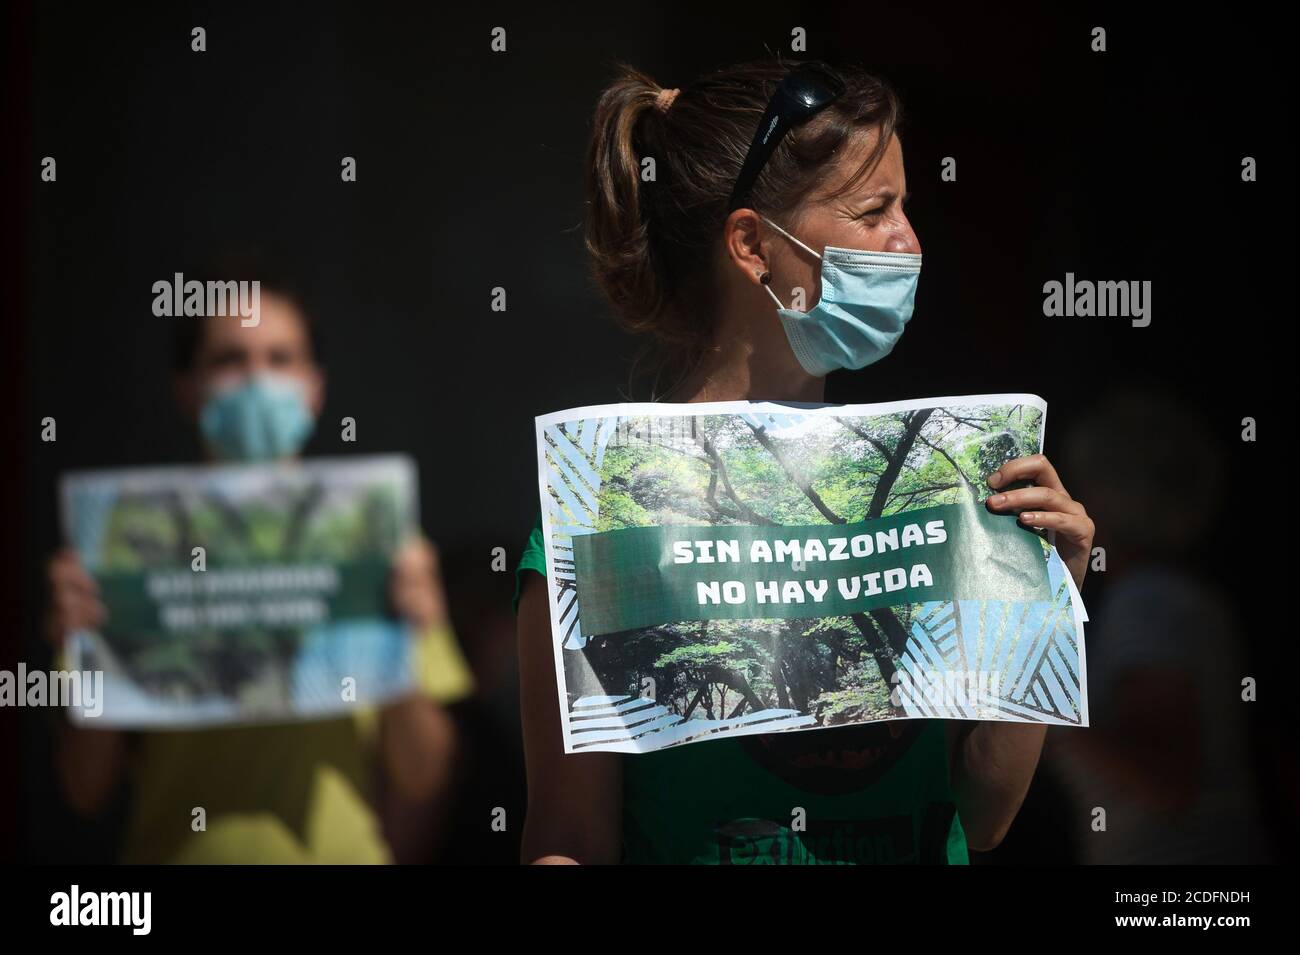 Protesters wearing face masks hold placards expressing their opinion during the demonstration at La Malagueta square in Malaga.From 28 to 30 August members of 'Extinction Rebellion' movement have organized several actions to alert people about the situation of Amazonian Selva, considere the 'lungs of the world'; against commercial treaty between EU - MERCOSUR agreed for Brazilian president Jair Bolsonaro which would cause the deforestation of Amazonia and a negative impact in the climate while forest fires continue rising in the region. Stock Photo